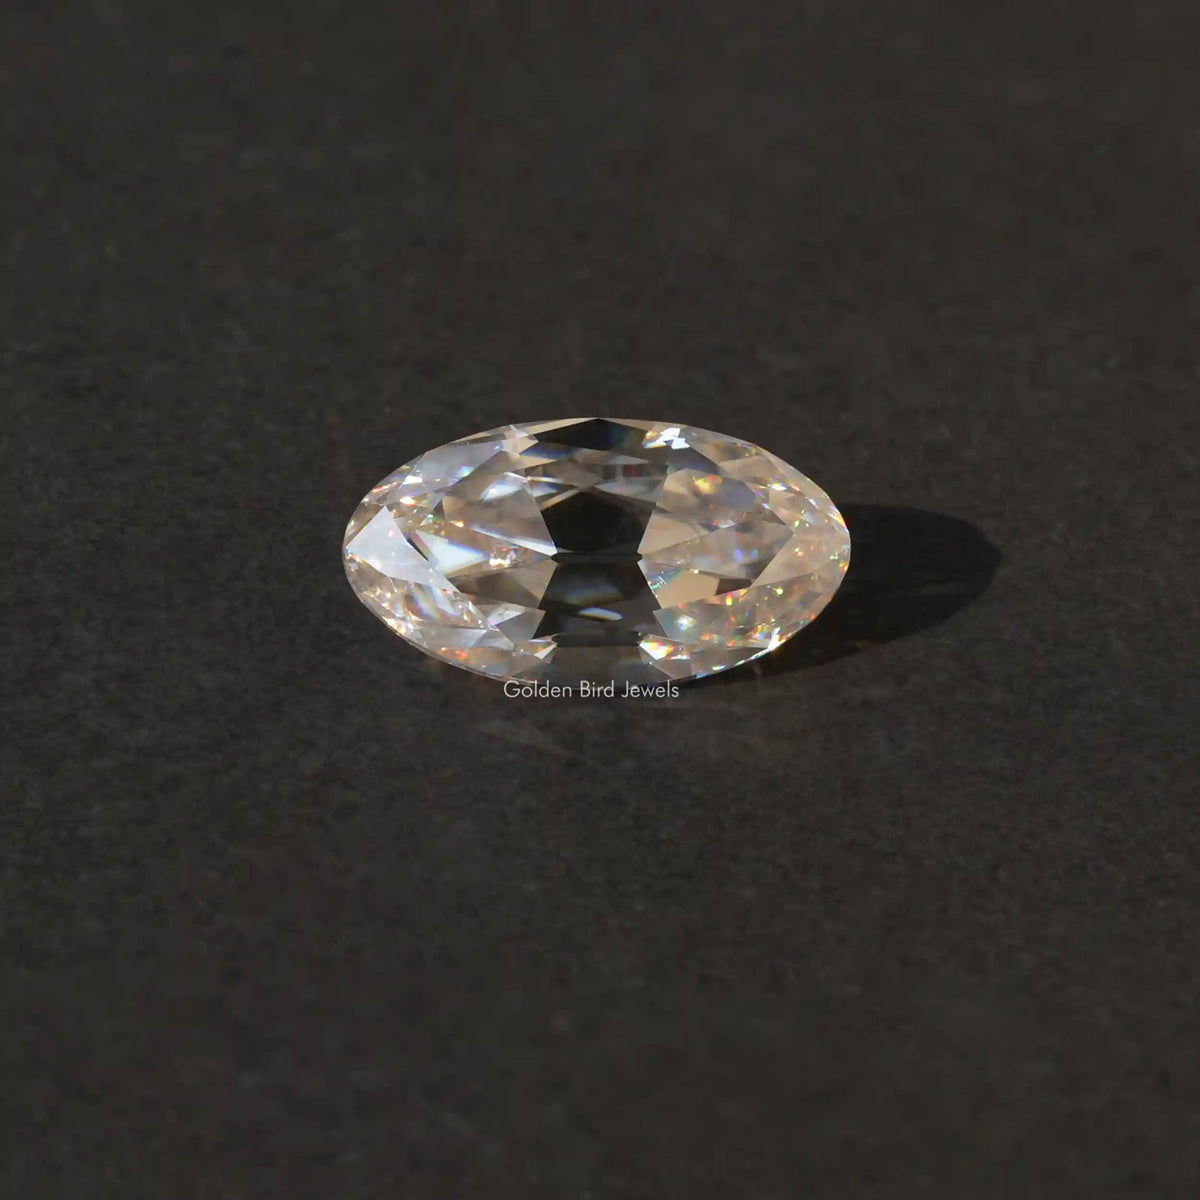 [This moissanite moval cut loose stone made of near colorless]-[Golden Bird Jewels]